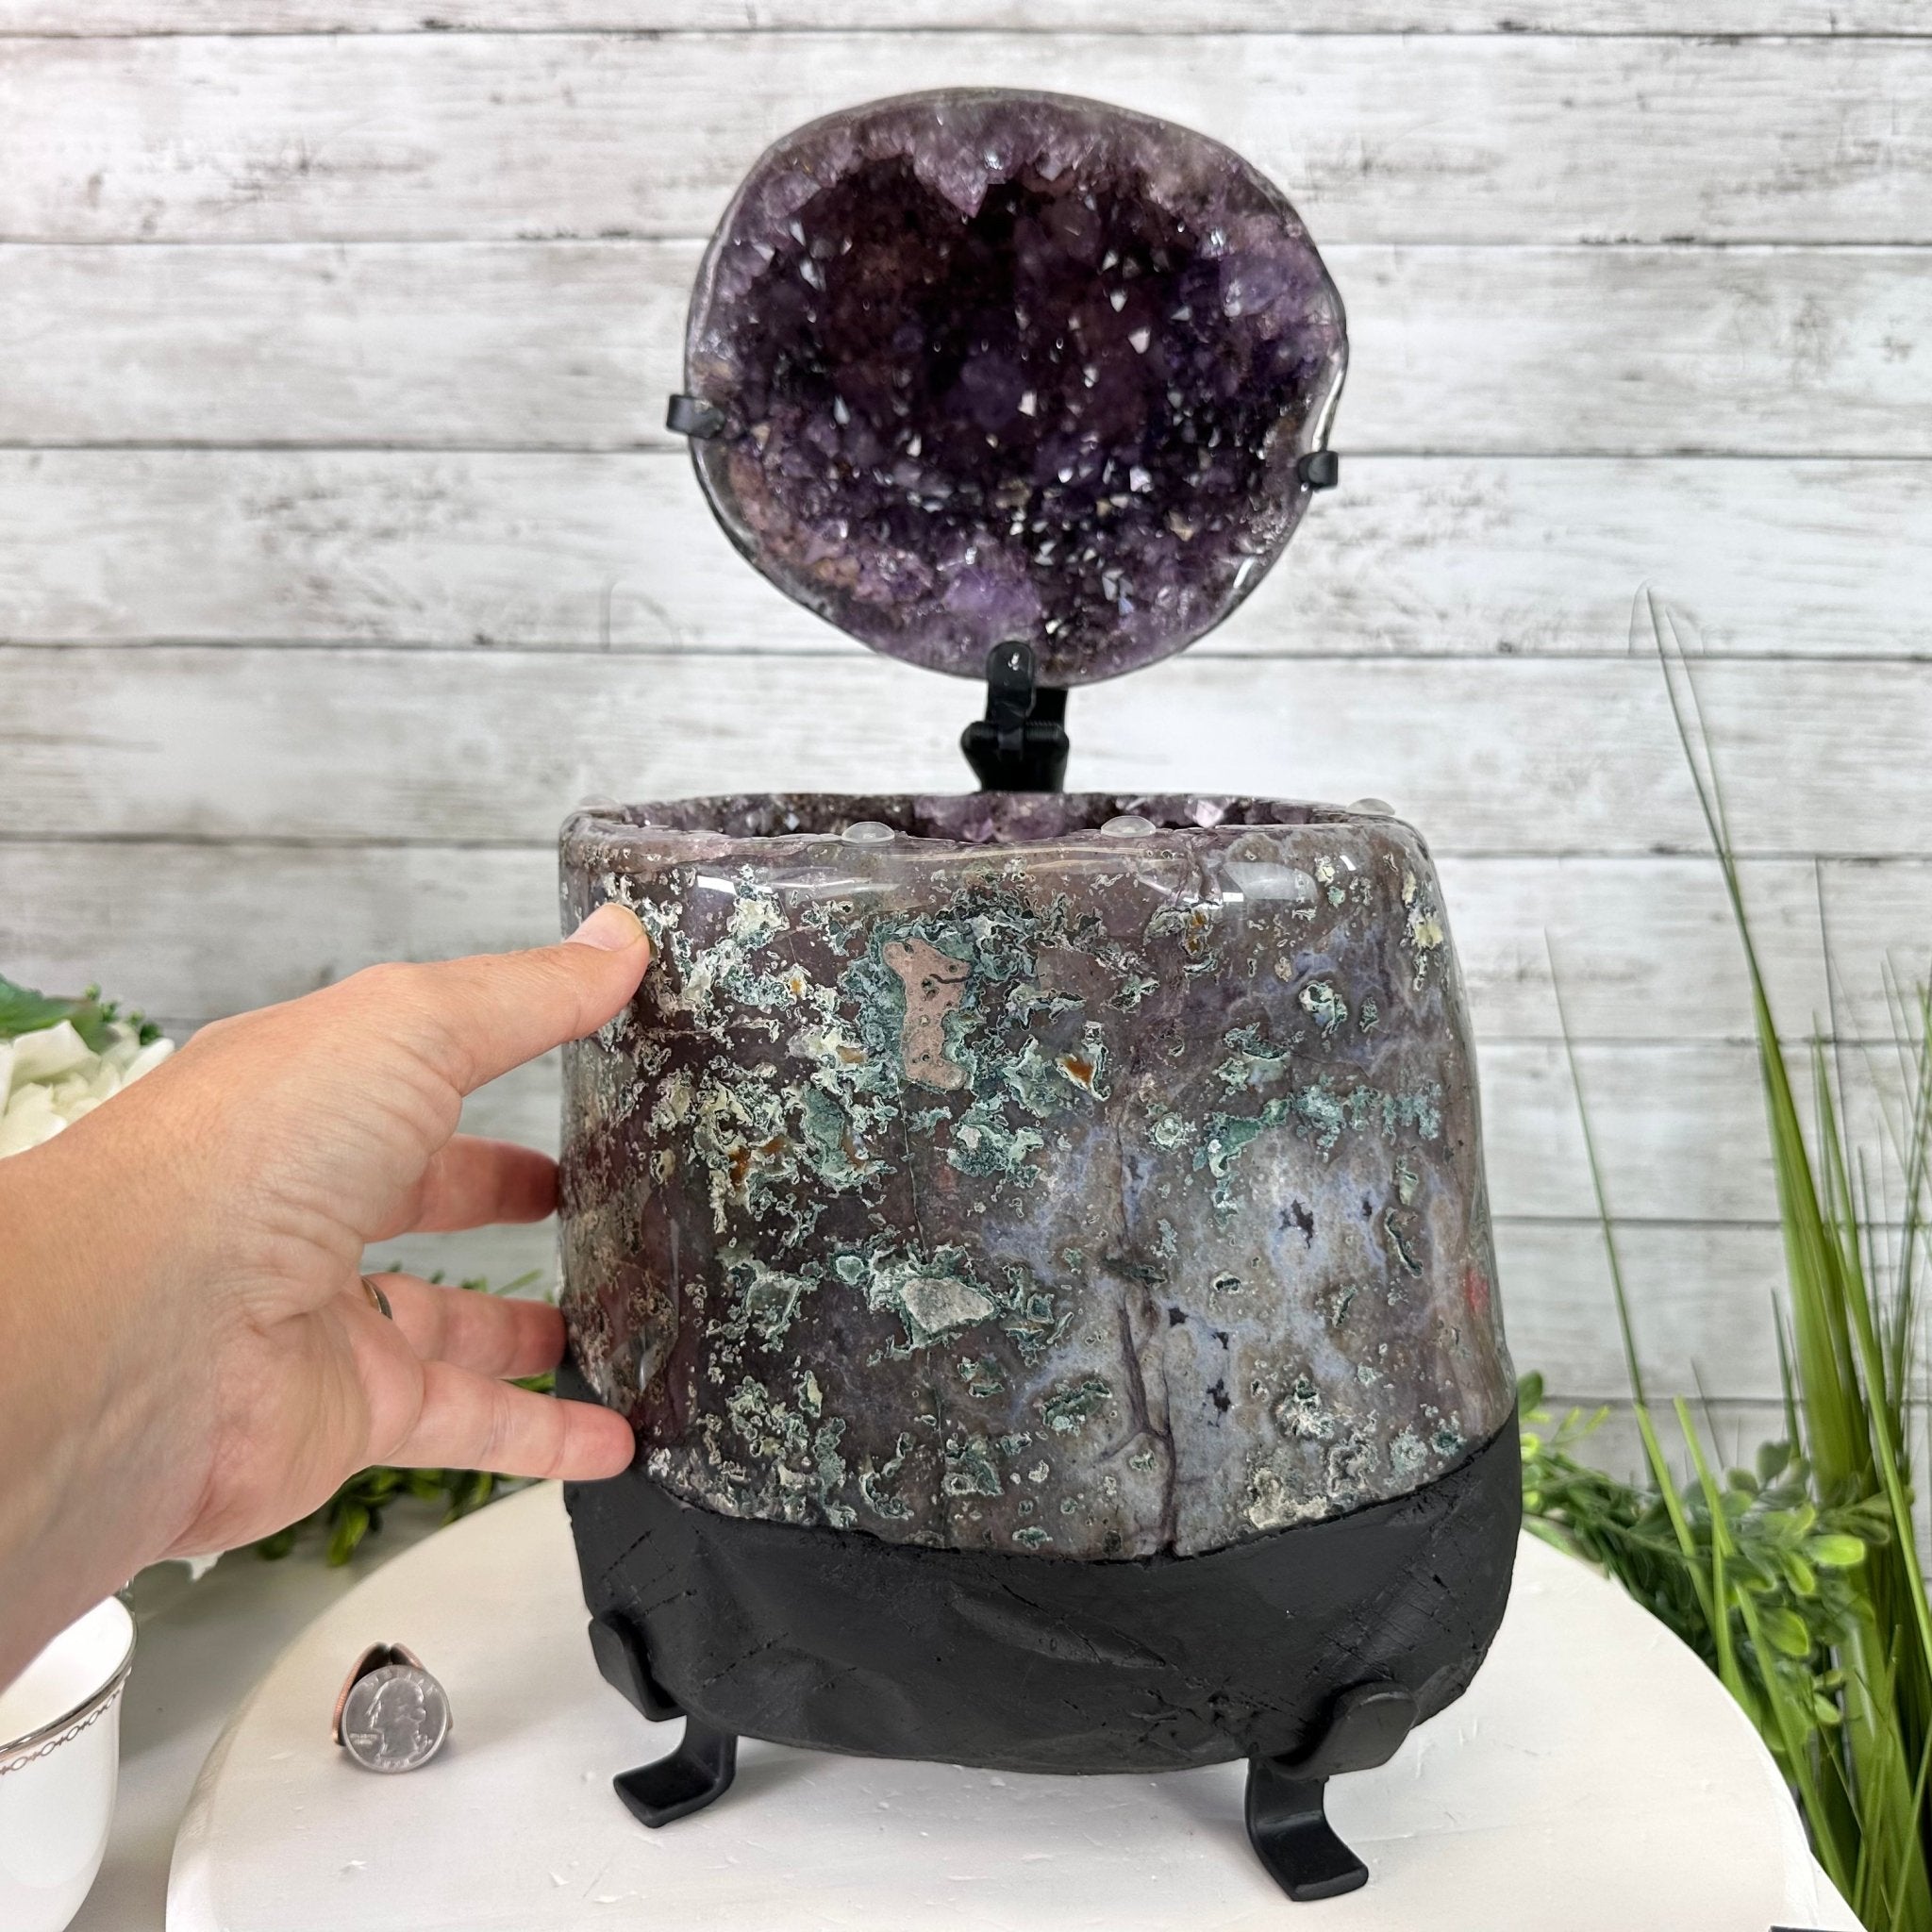 Extra Plus Quality Polished Amethyst "Jewelry Box", Clam Shell style Lid, 25.7 lbs & 15.3" tall, Model #5656-0012 by Brazil Gems - Brazil GemsBrazil GemsExtra Plus Quality Polished Amethyst "Jewelry Box", Clam Shell style Lid, 25.7 lbs & 15.3" tall, Model #5656-0012 by Brazil GemsGeode Jewelry Boxes5656-0012